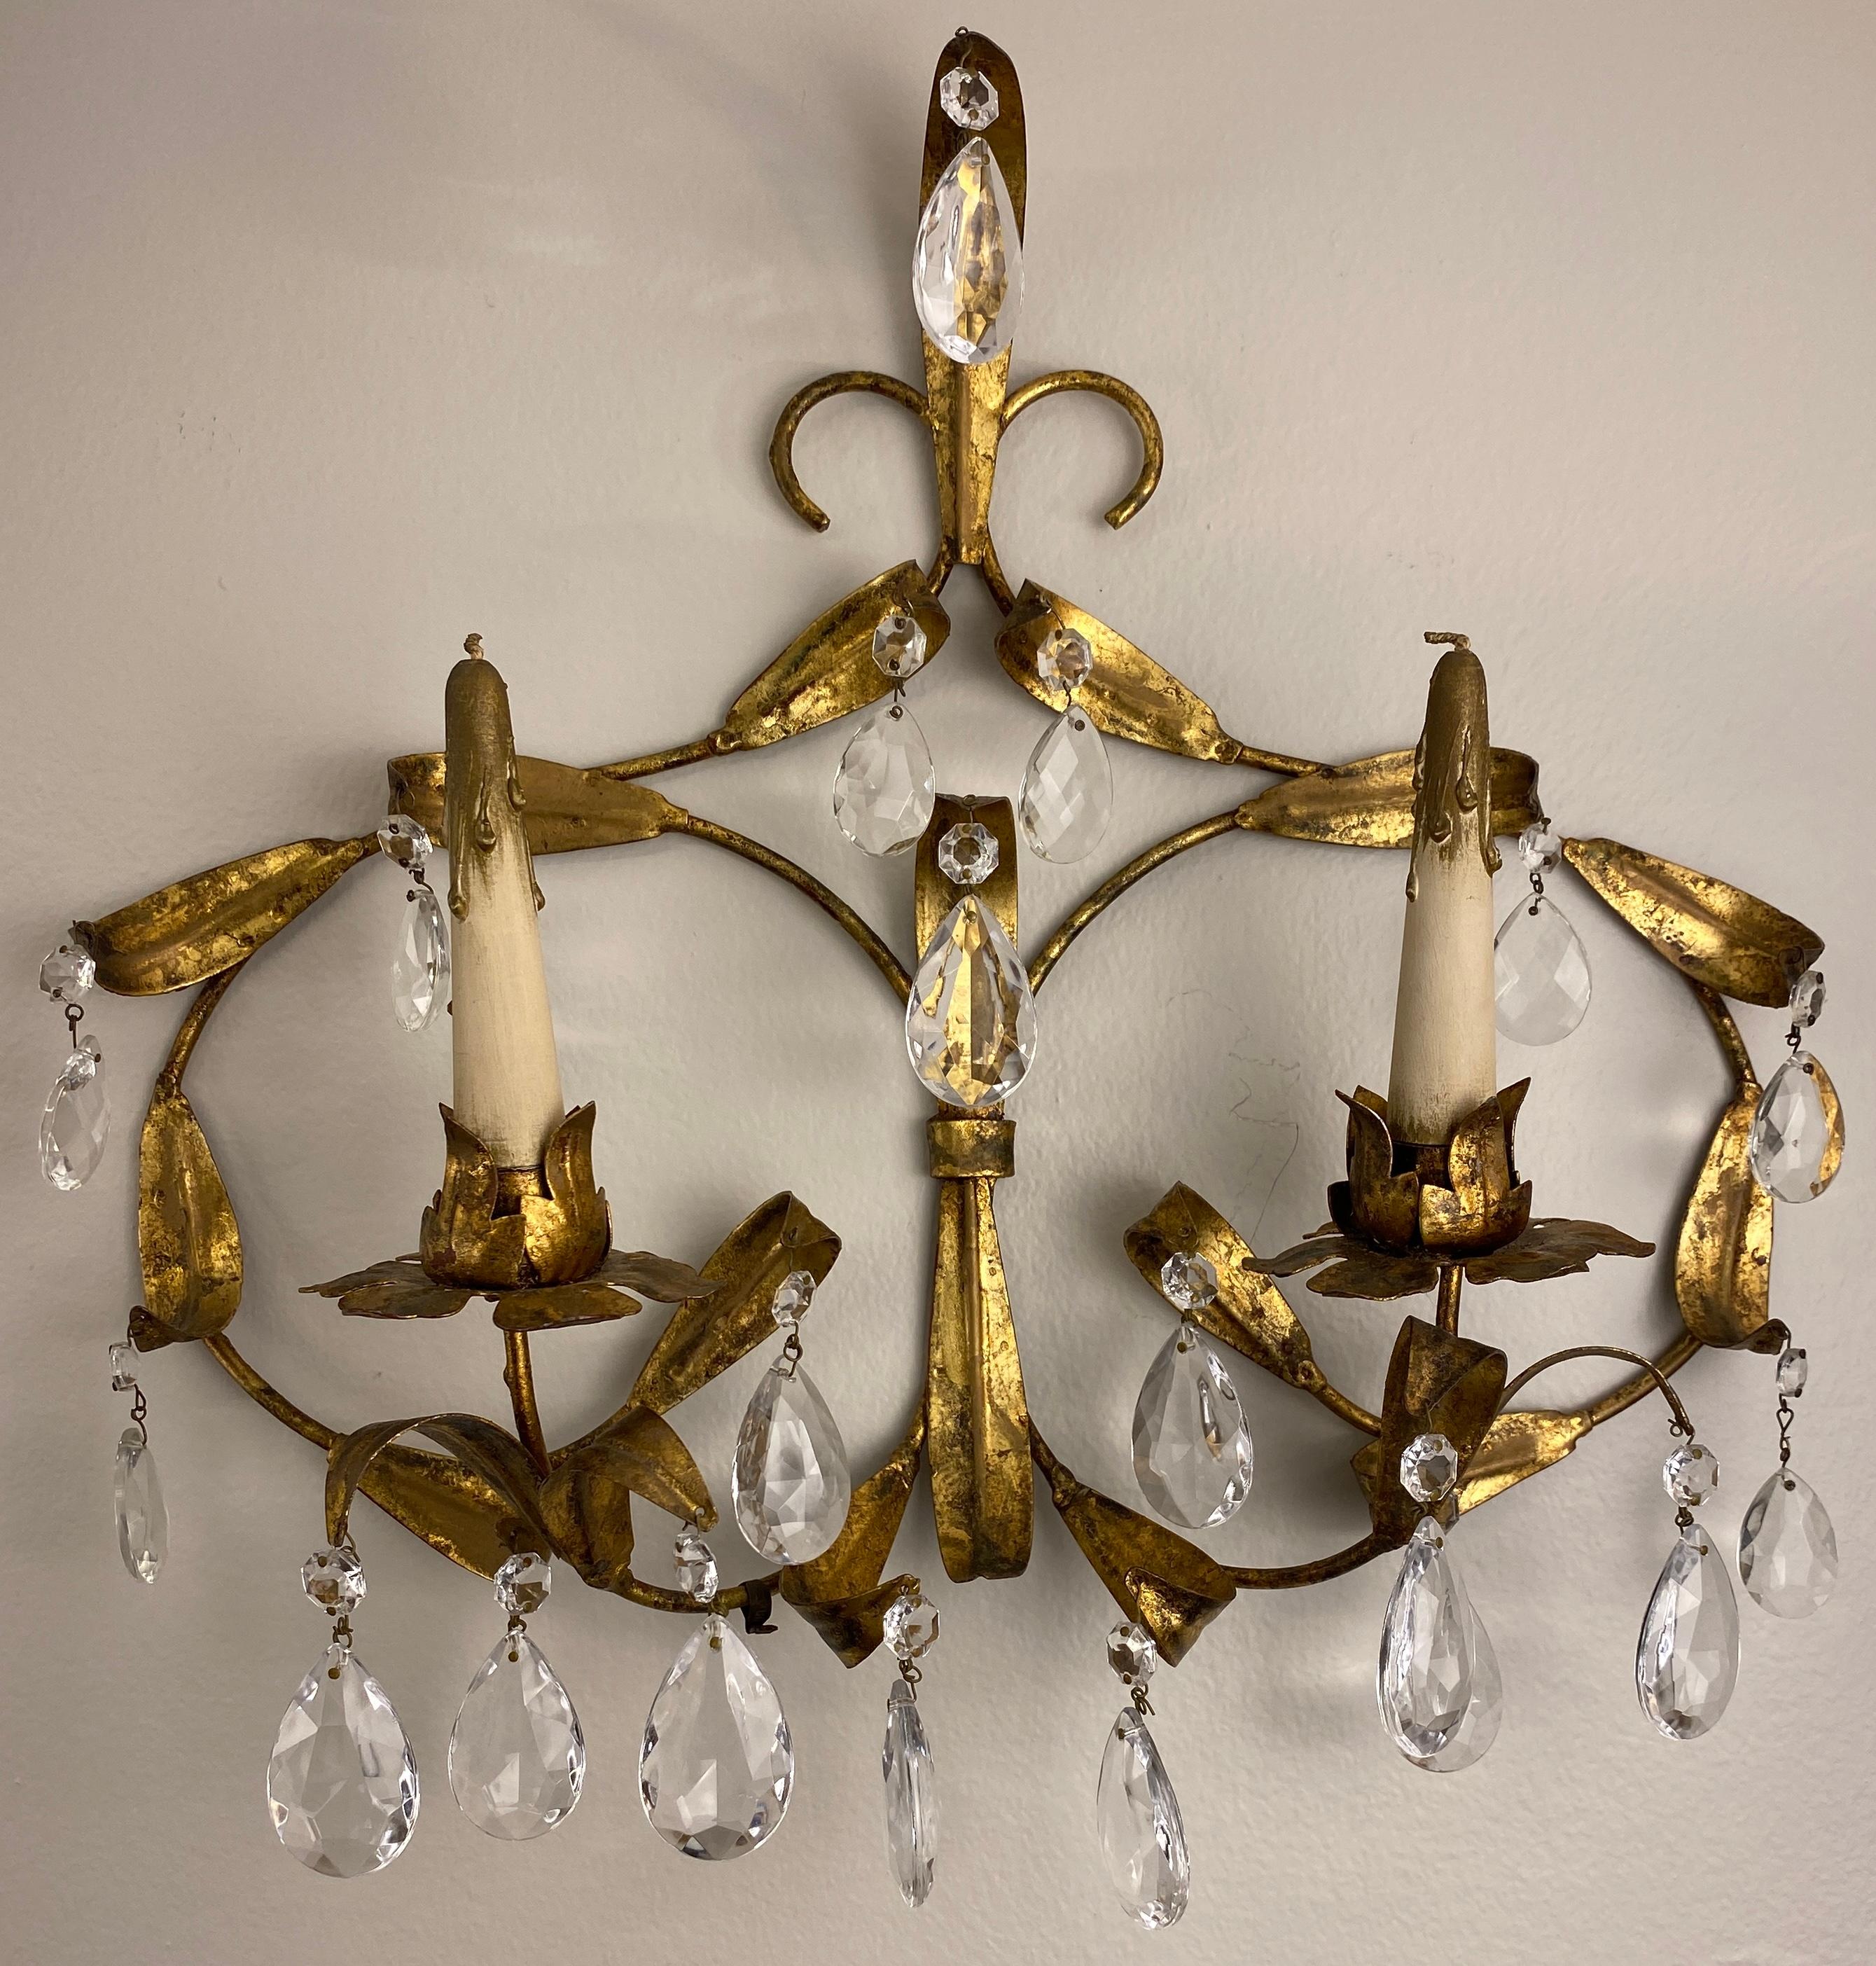 Pair of Maison Baguès Mid-20th Century Gilt Metal and Crystal Wall Sconces In Good Condition For Sale In Miami, FL